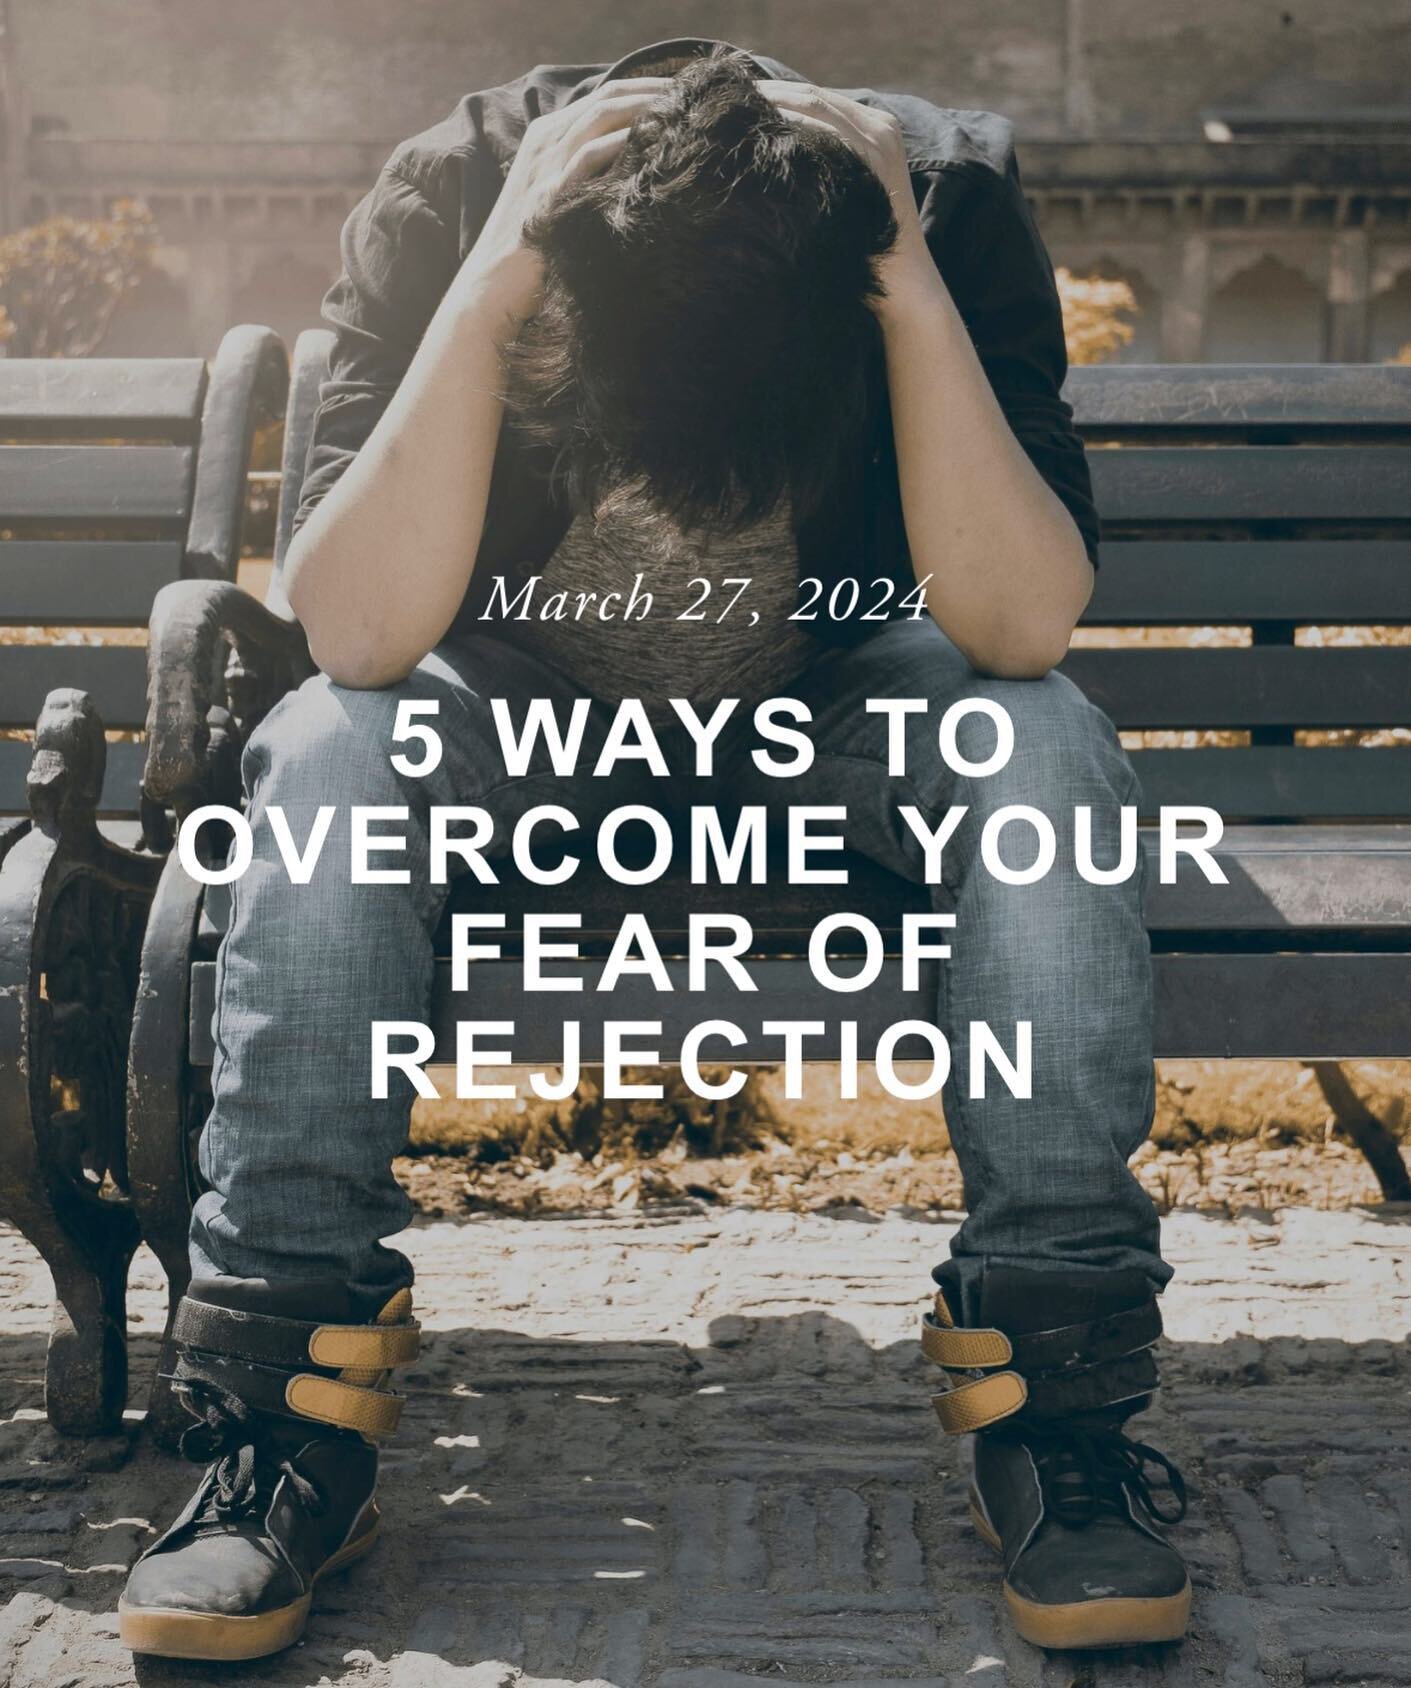 If you&rsquo;re afraid of rejection, this blog is a must-read!

&ldquo;When you have a fear of rejection, it is an irrational, continuous fear of social exclusion. You may even be someone who struggles with a social phobia or Social Anxiety Disorder,